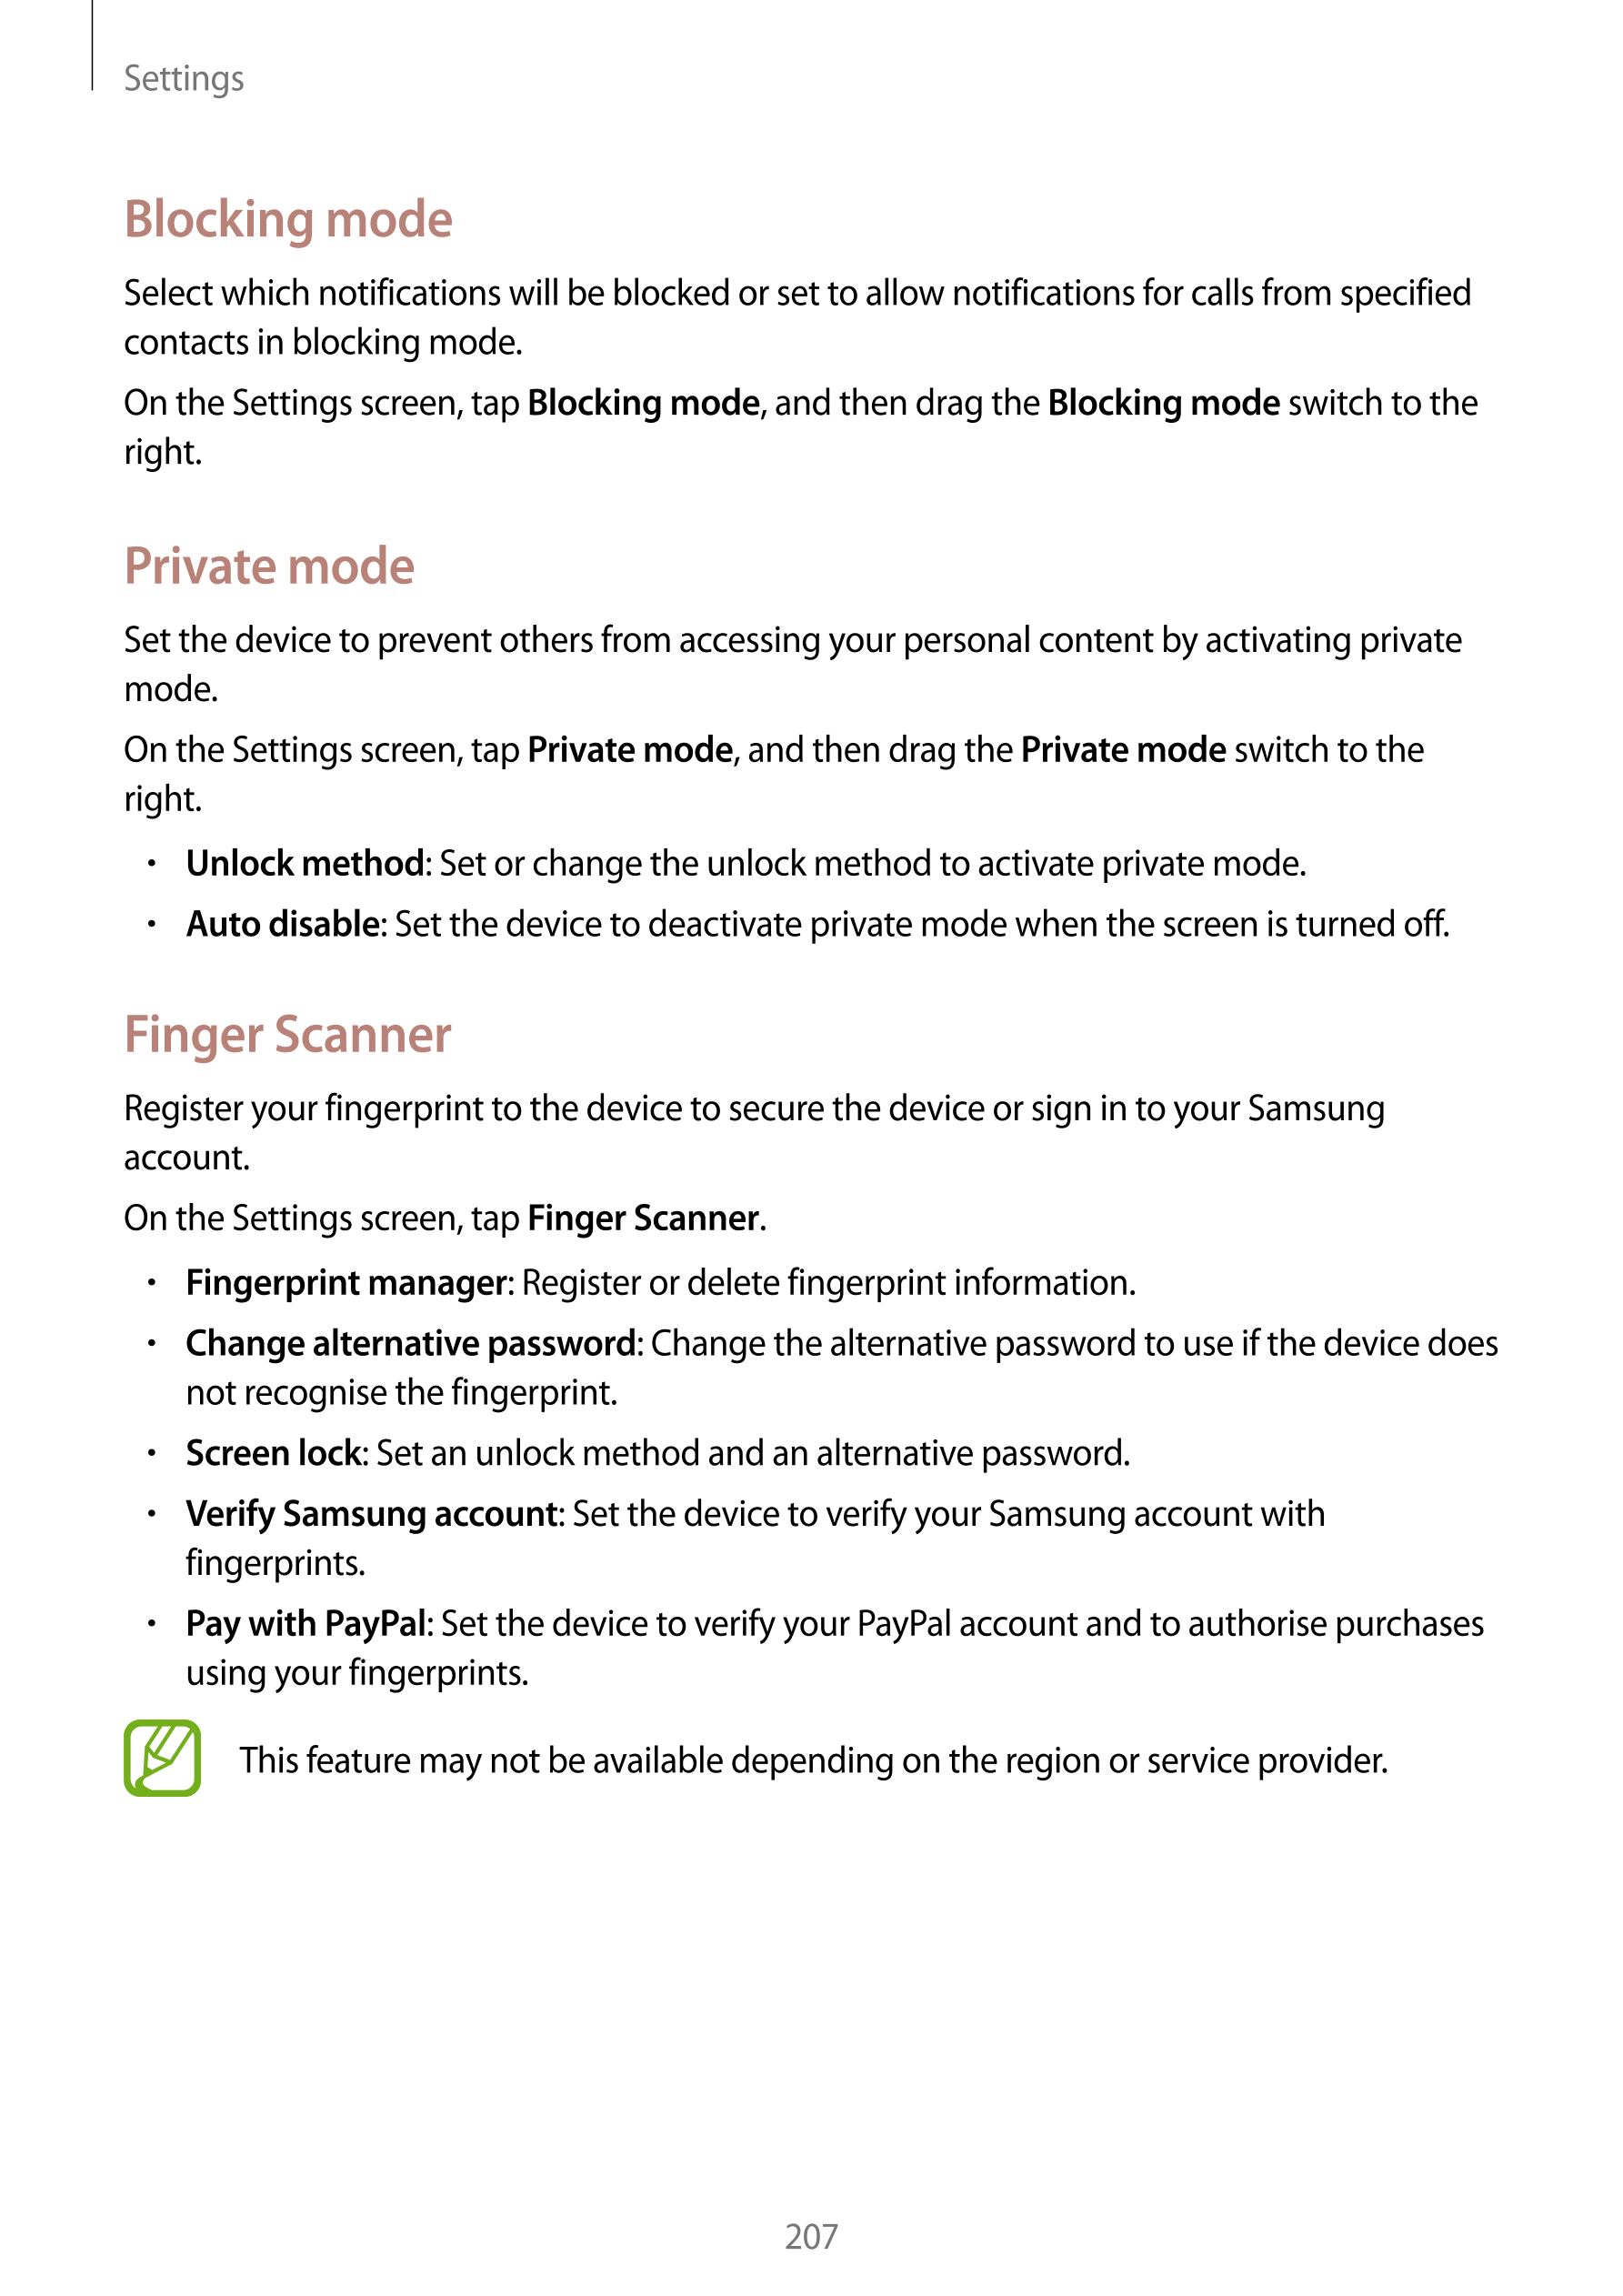 Settings
Blocking mode
Select which notifications will be blocked or set to allow notifications for calls from specified 
contac